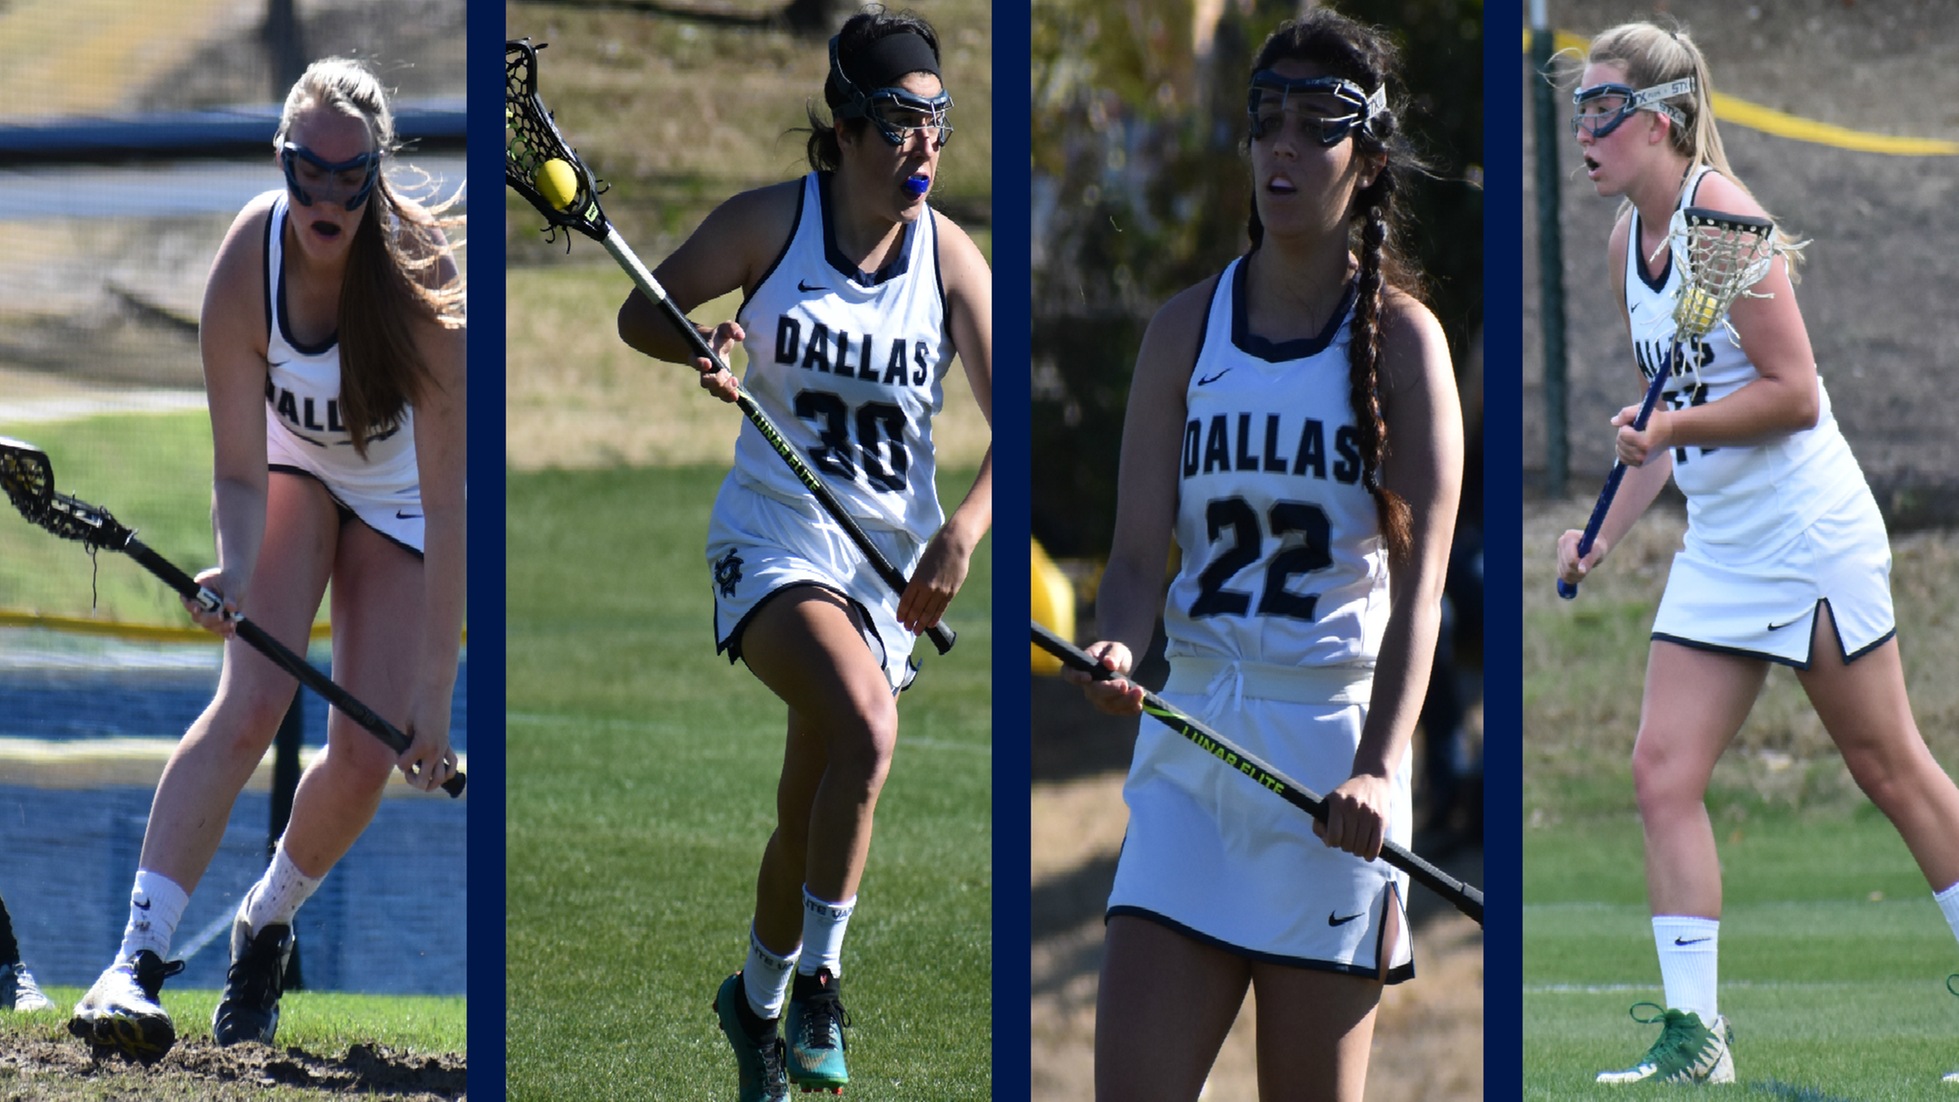 Four Named to All-SCAC Women's Lacrosse Team; Cosgrove and Pedrozo Garner 1st Team Awards